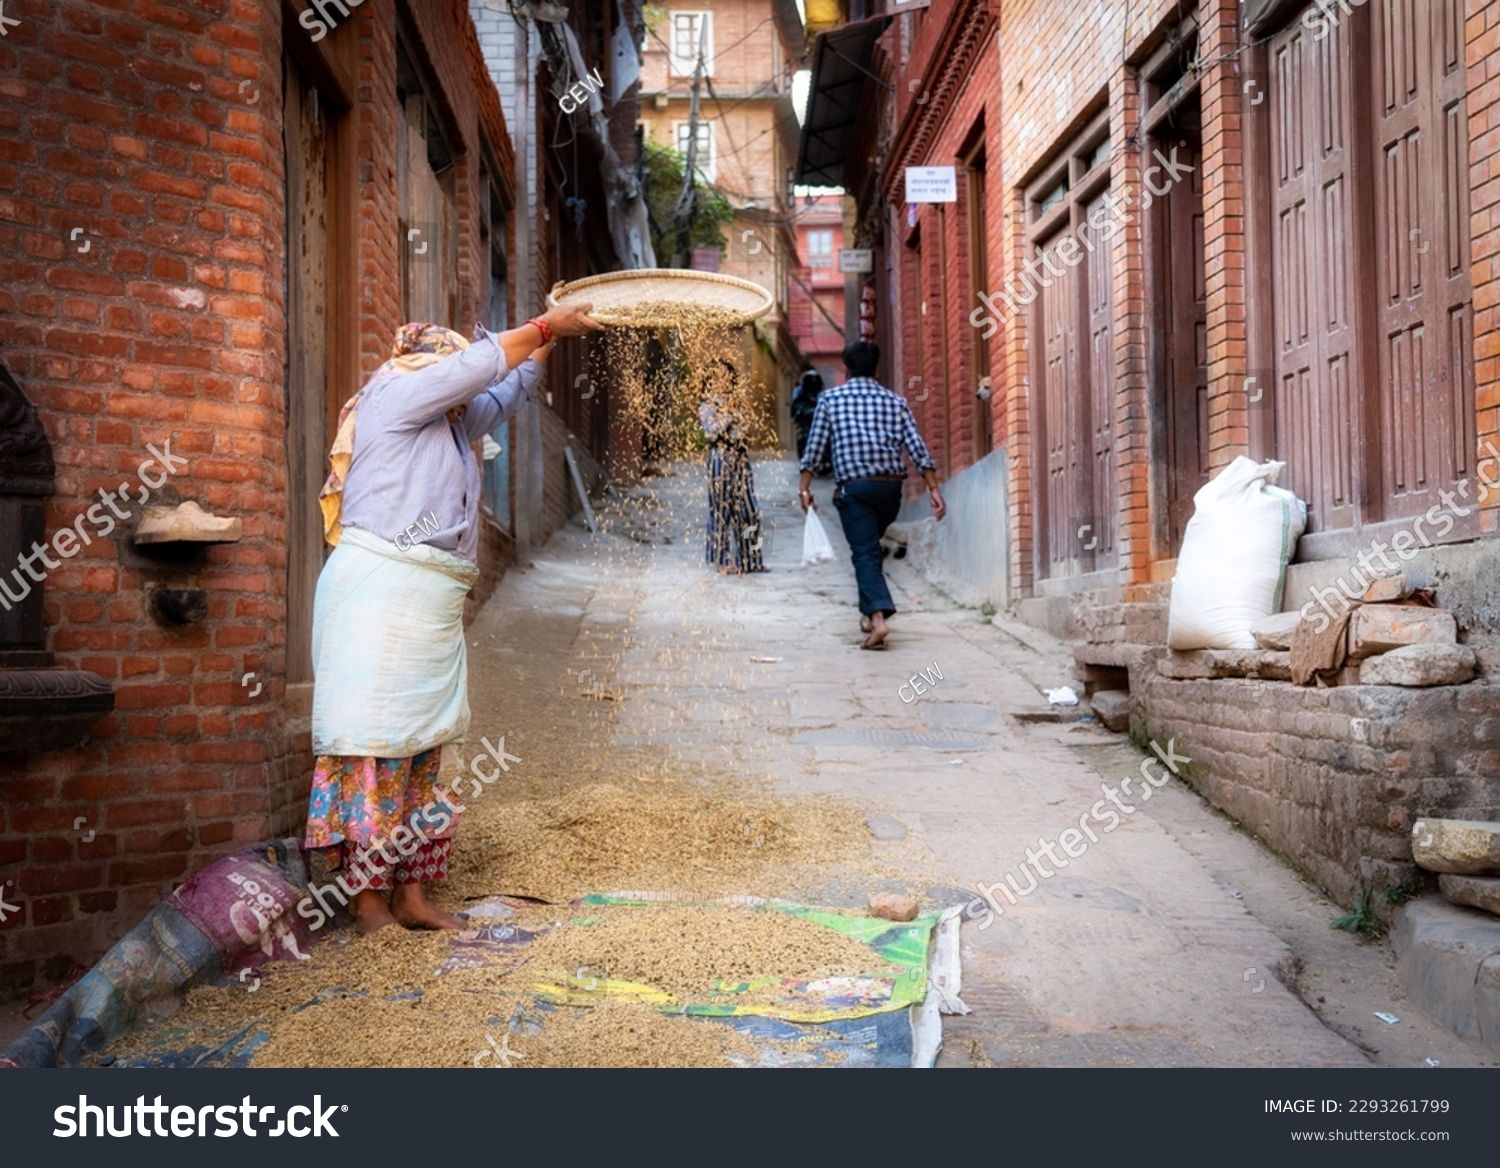 A woman sifting the chaff out of the rice in the old city of Bhaktapur Nepal. #2293261799